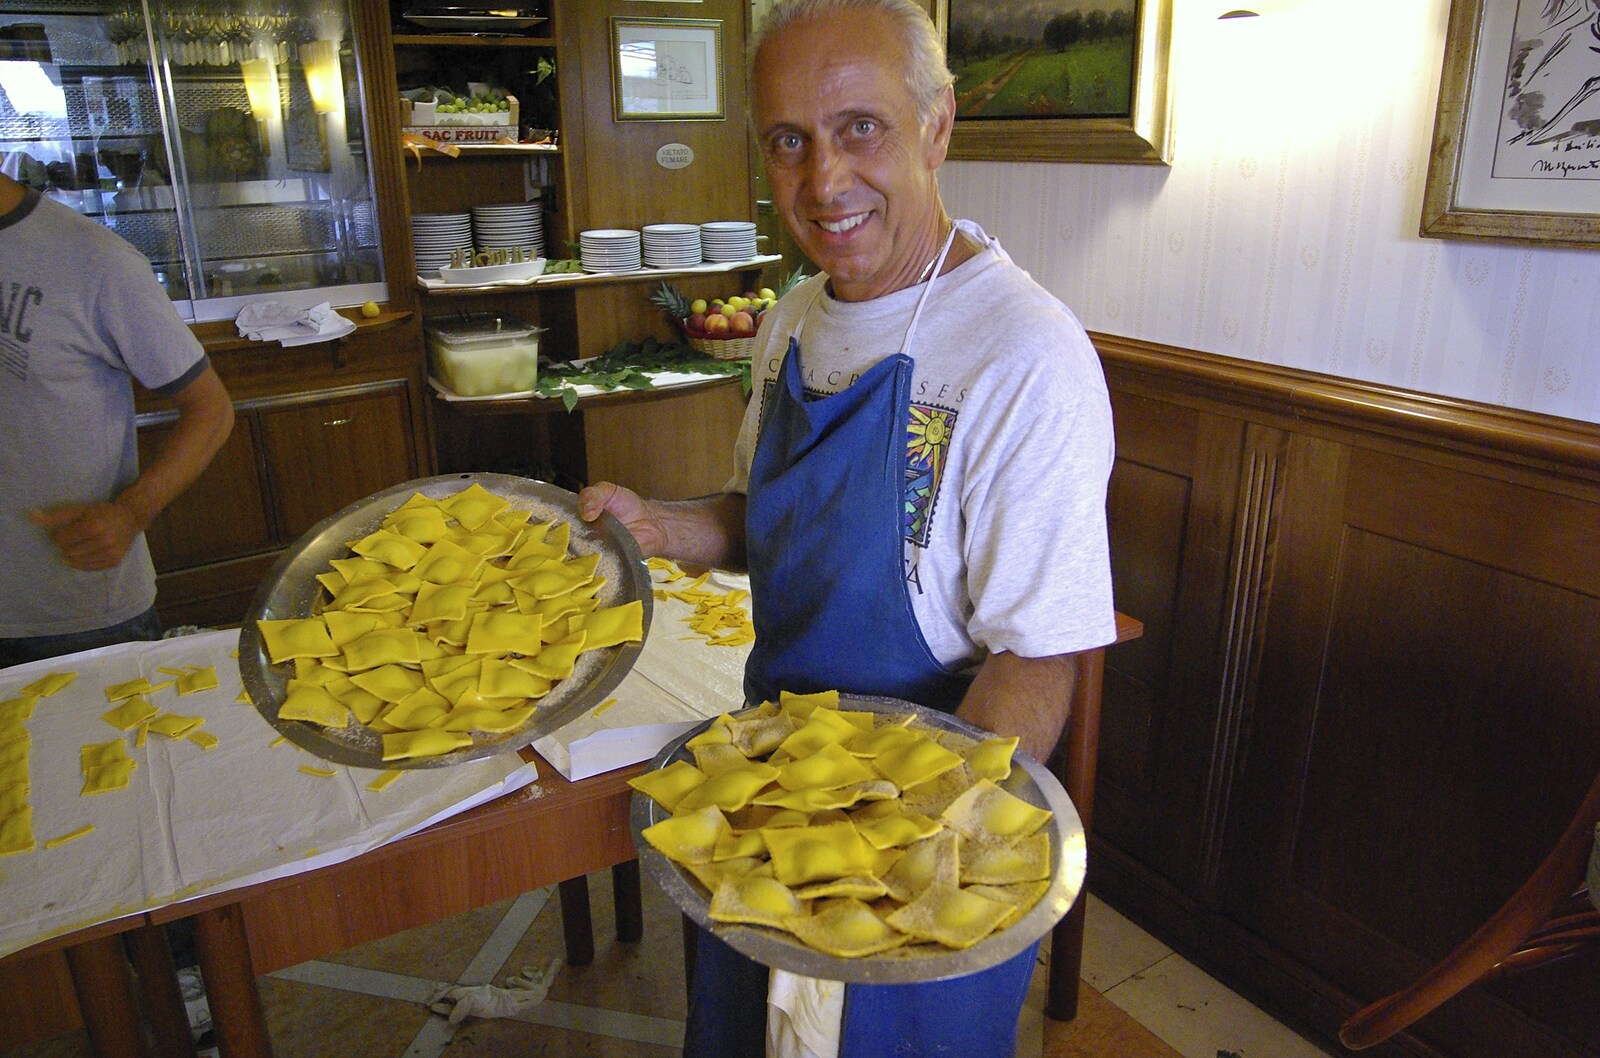 The chef proudly shows off his ravioli from A Sojourn in The Eternal City, Rome, Italy - 22nd July 2008